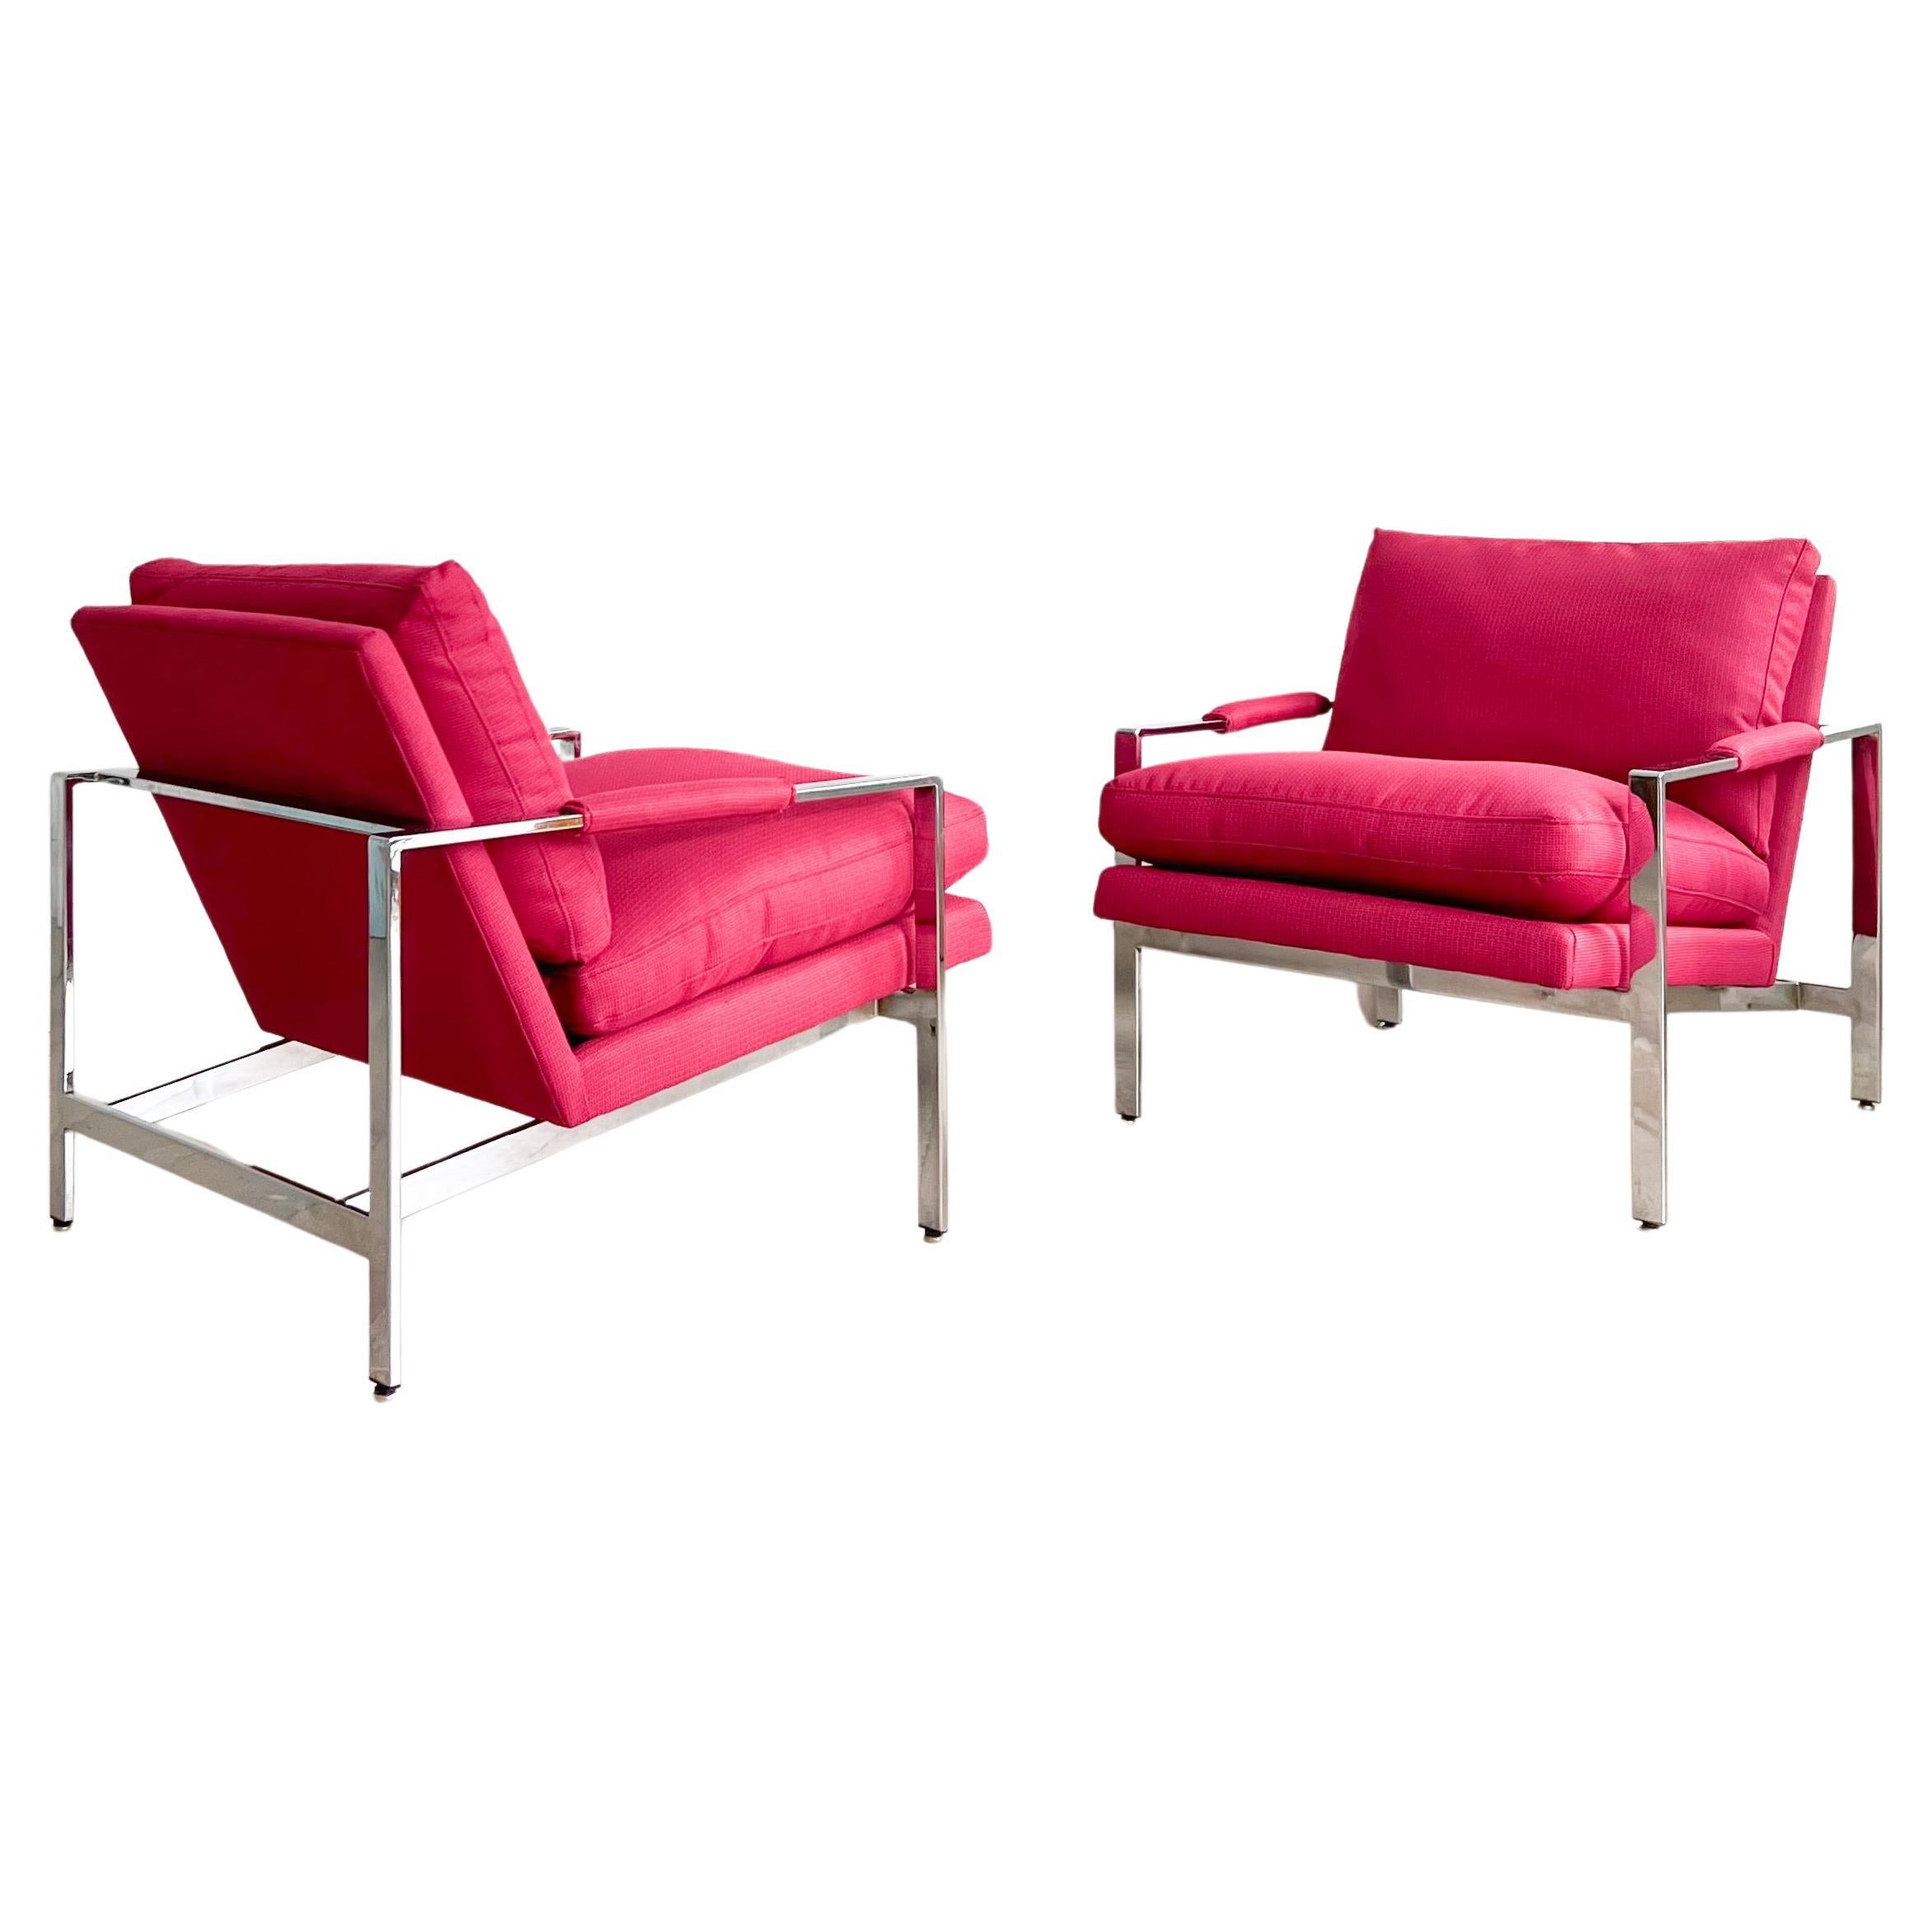 Pair Mid Century Modern Chrome Lounge Chairs by Milo Baughman for Thayer Coggin For Sale